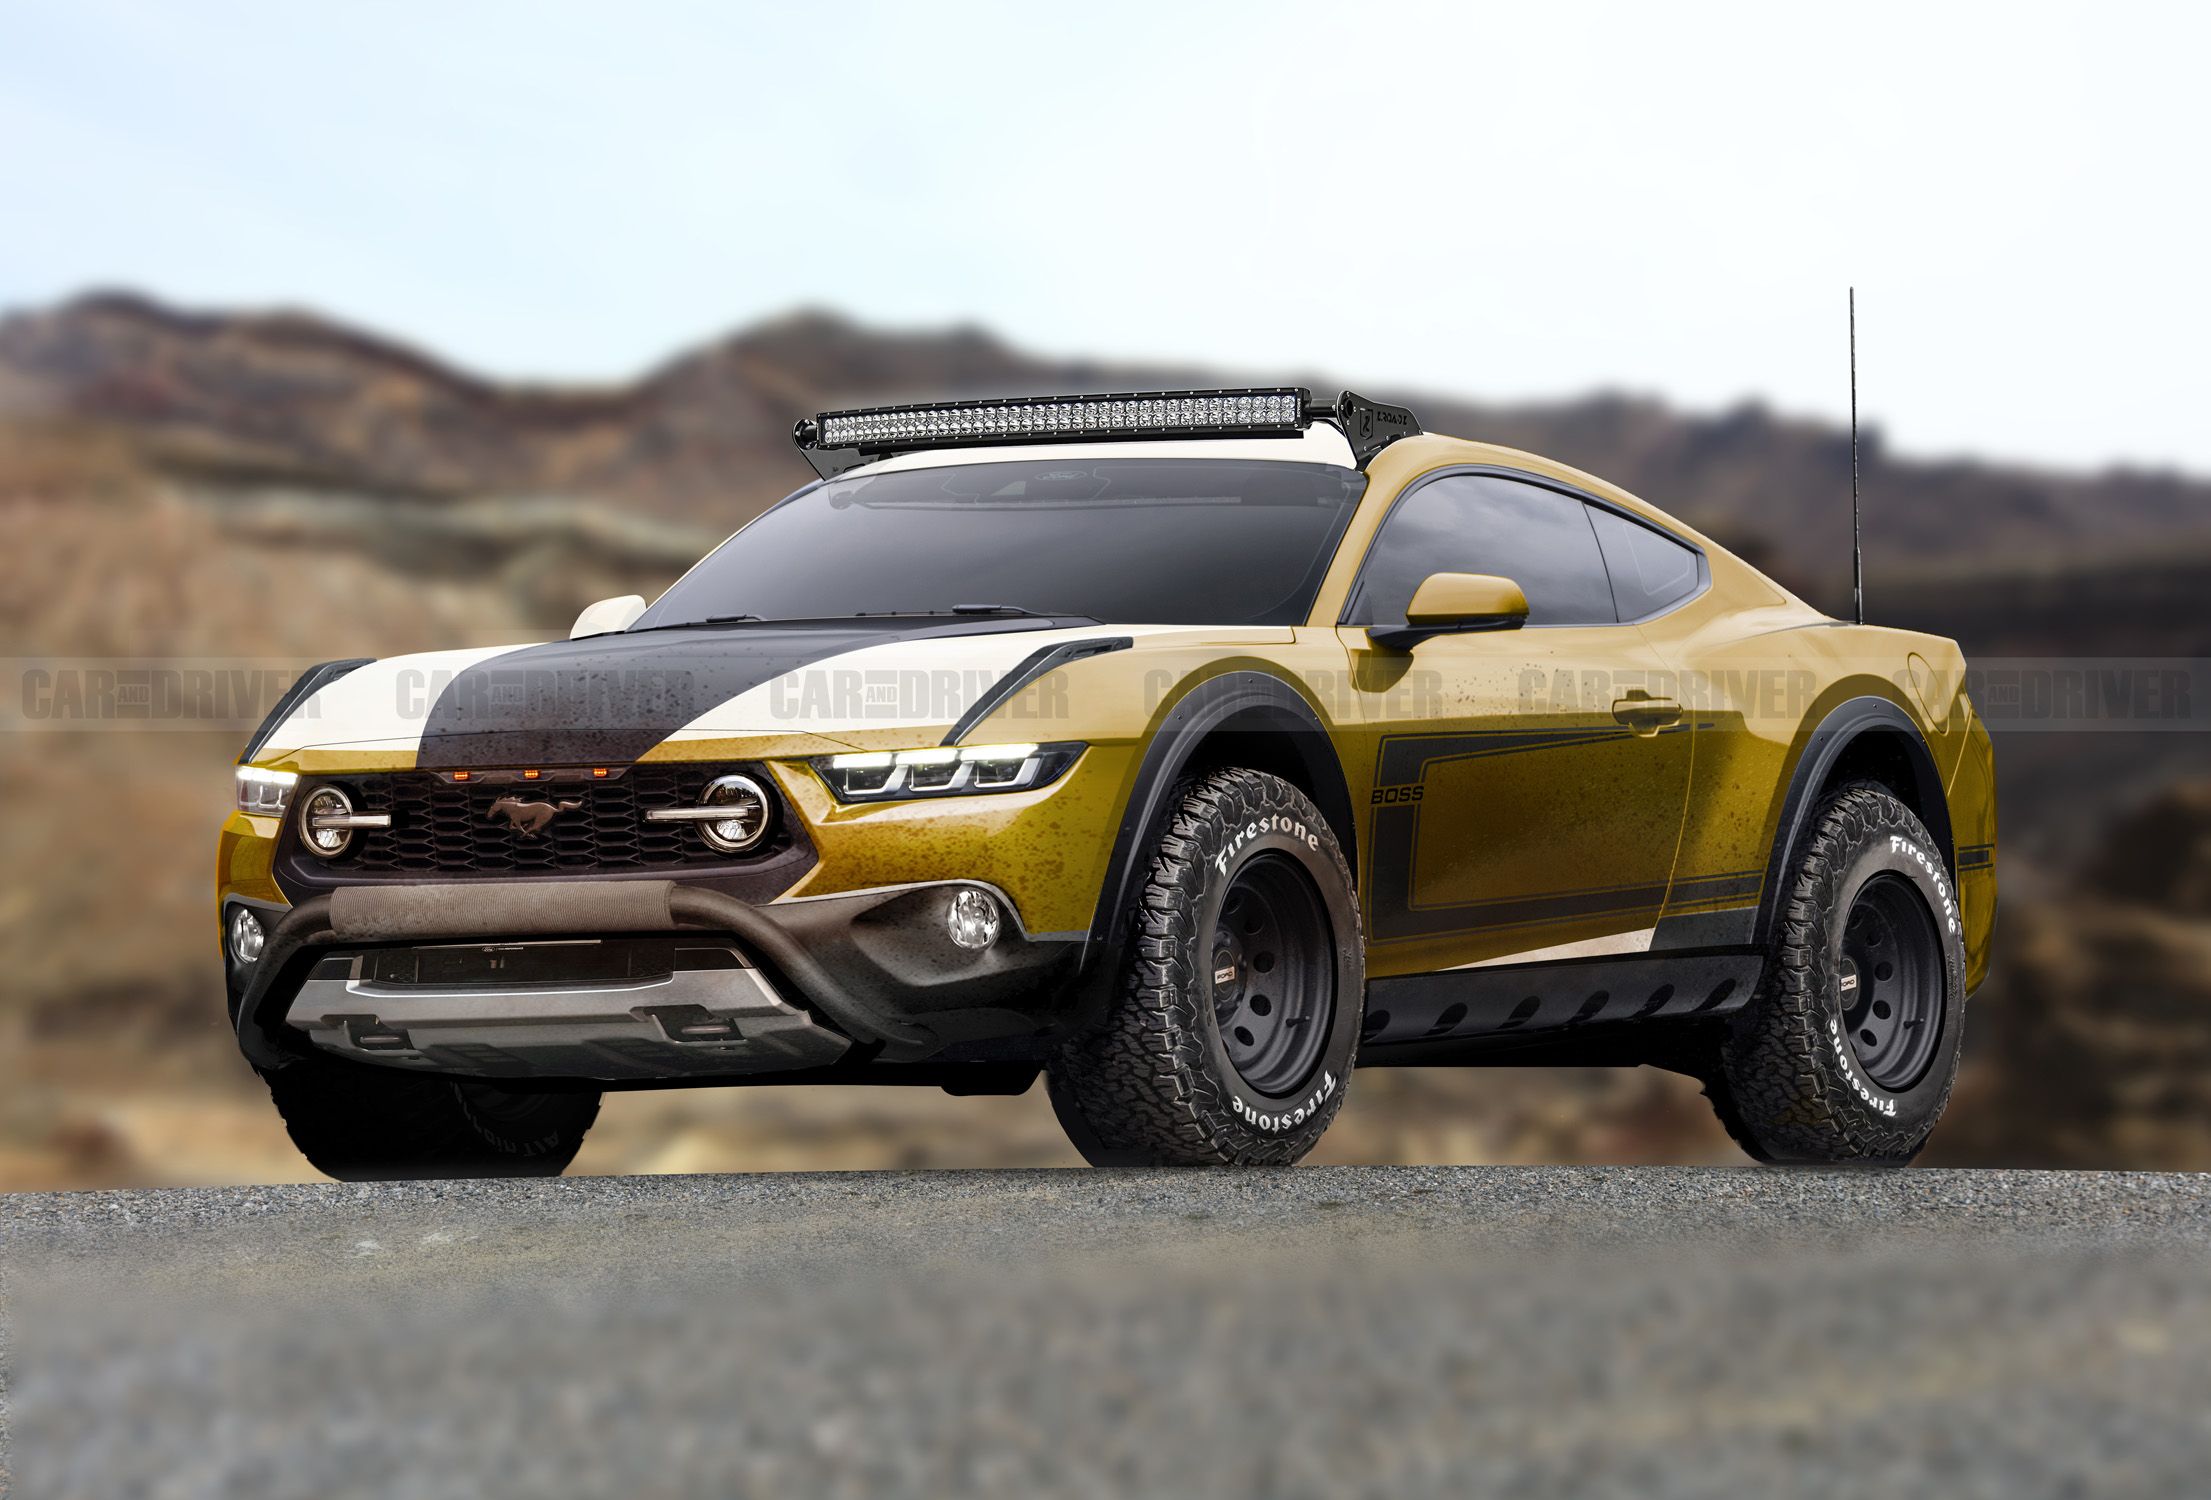 2026 Ford Mustang Raptor Copy 6435aed2487a4 